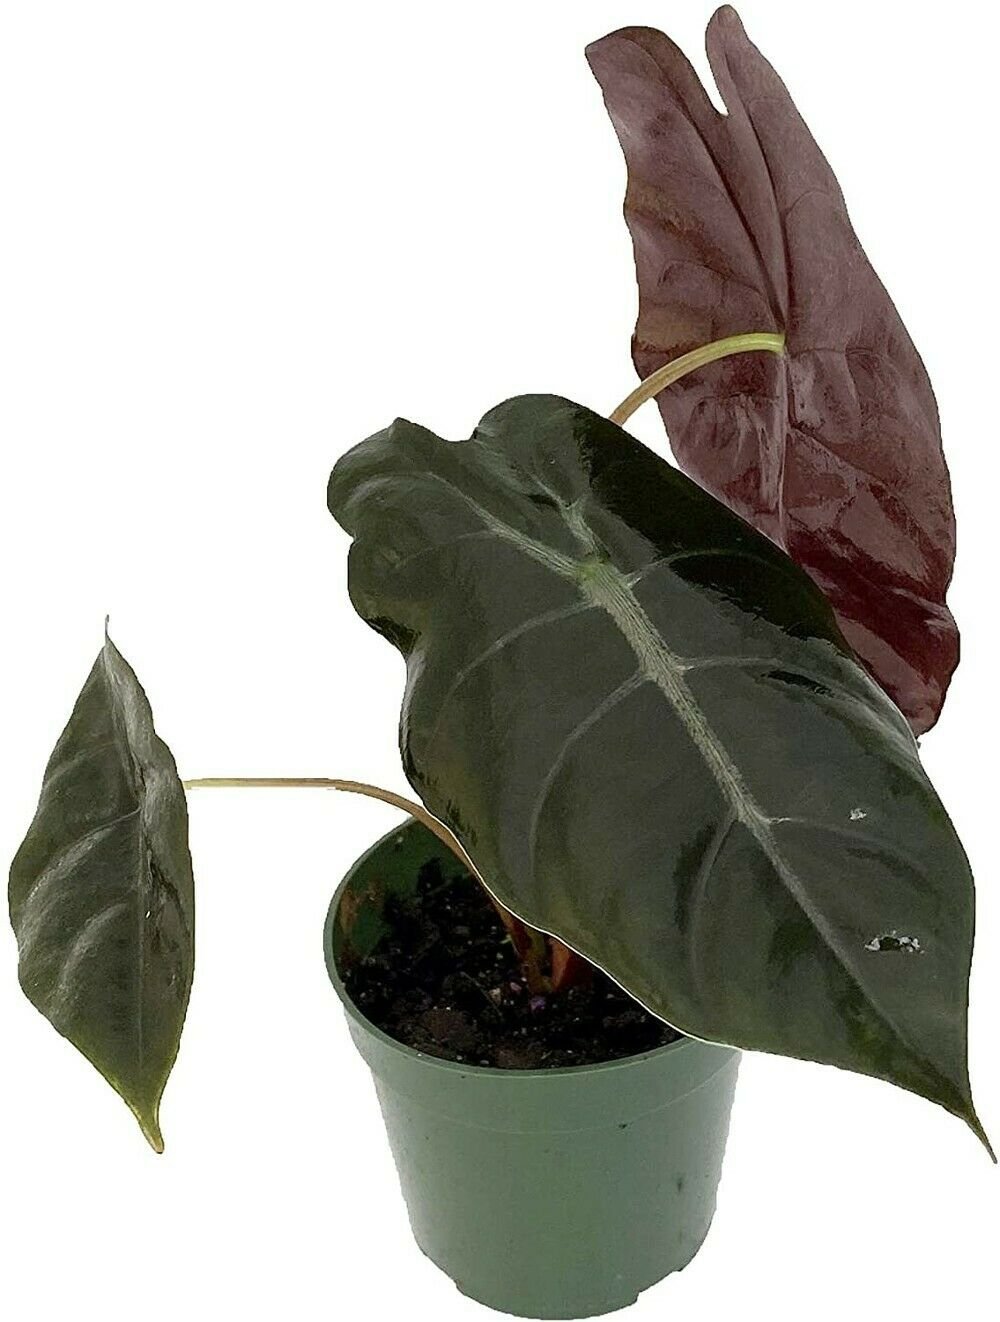 Alocasia African Mask Chantrieri Exotic Leaves Easy Grow House Live Plant 4" Pot